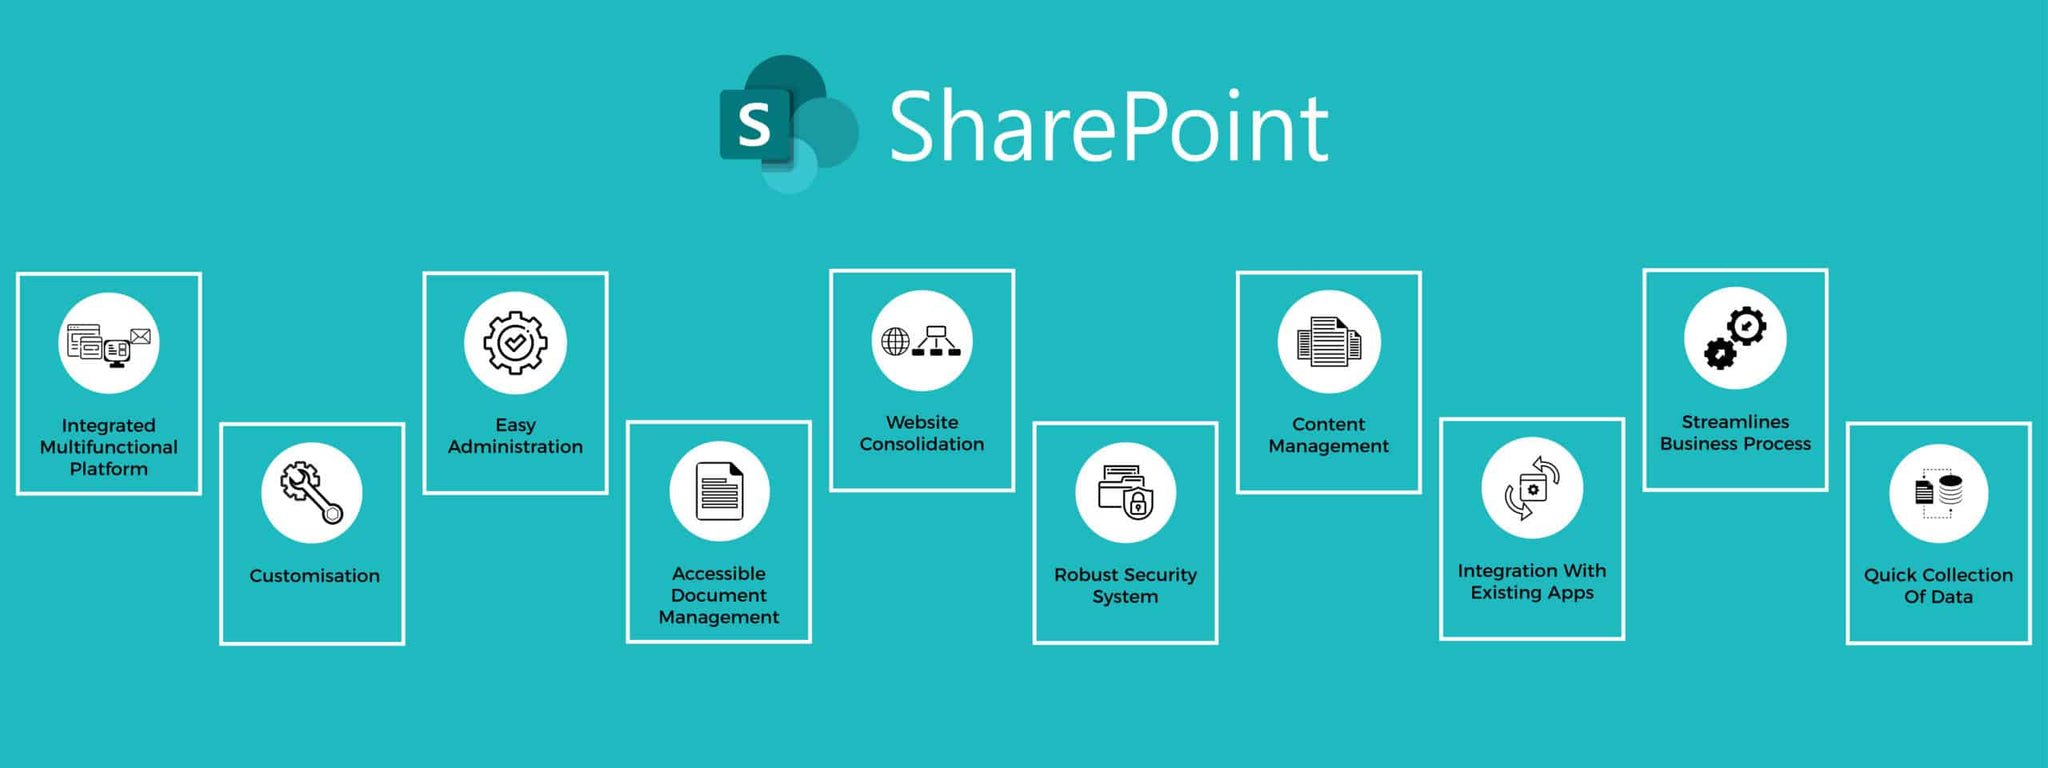 What Are The Benefits Of Using Sharepoint?